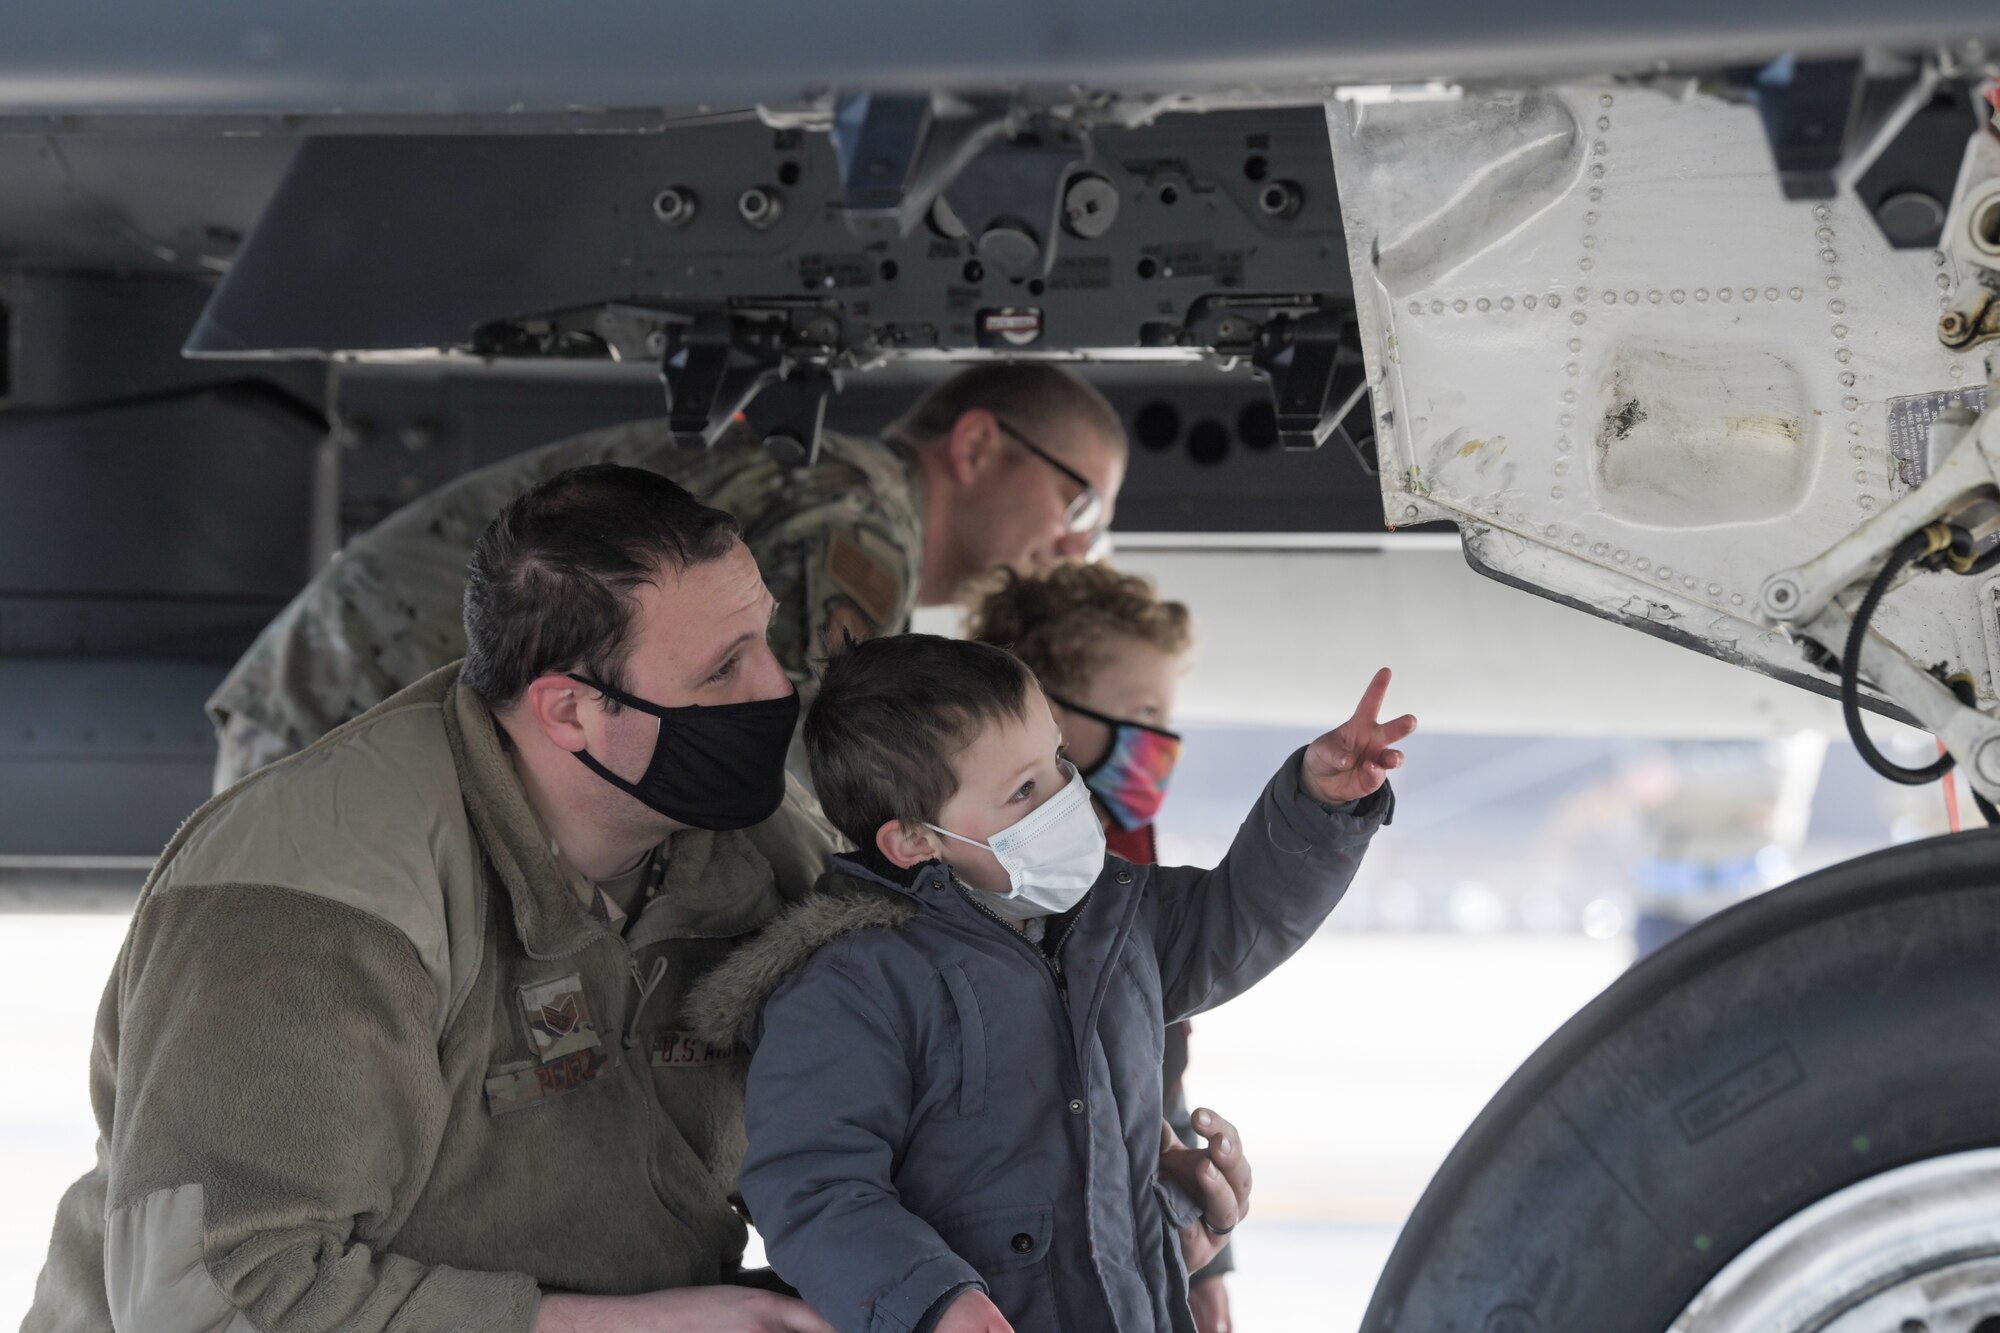 An Airman assigned to the 48th Fighter Wing shows his son around an F-15E Strike Eagle during a tour supporting the Month of the Military Child on April 15, 2021, at Royal Air force Lakenheath, England. Approximately 2 million military children have experienced a parental deployment since 9/11. (U.S. Air Force photo by Senior Airman Shanice Ship)